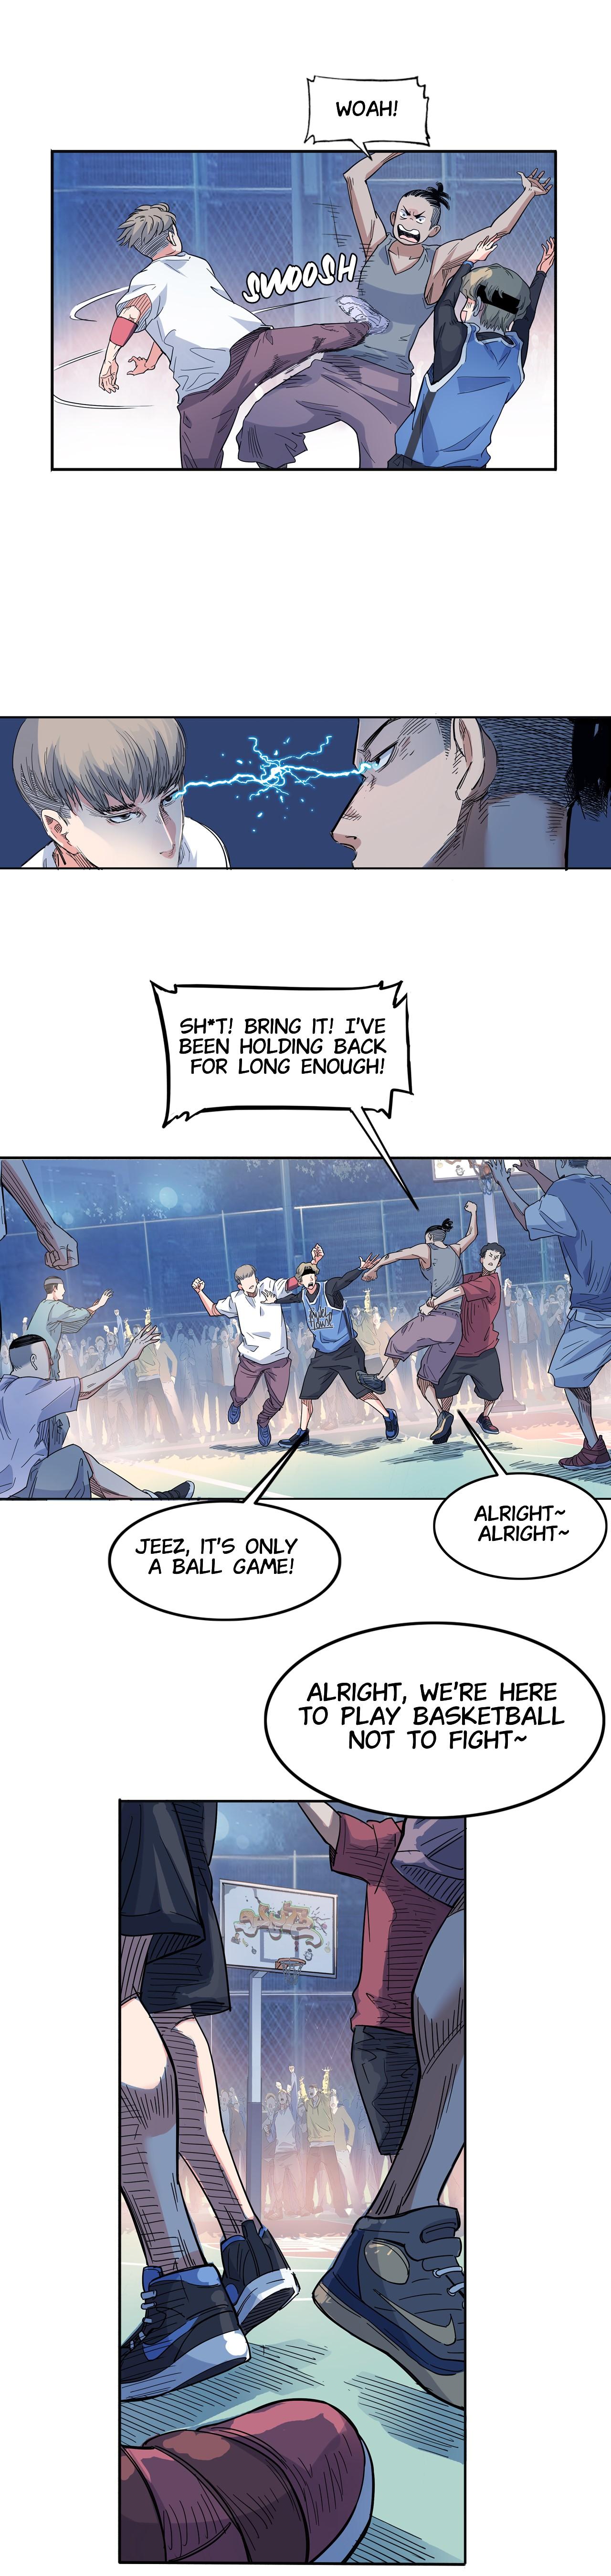 Streetball In The Hood - Page 3